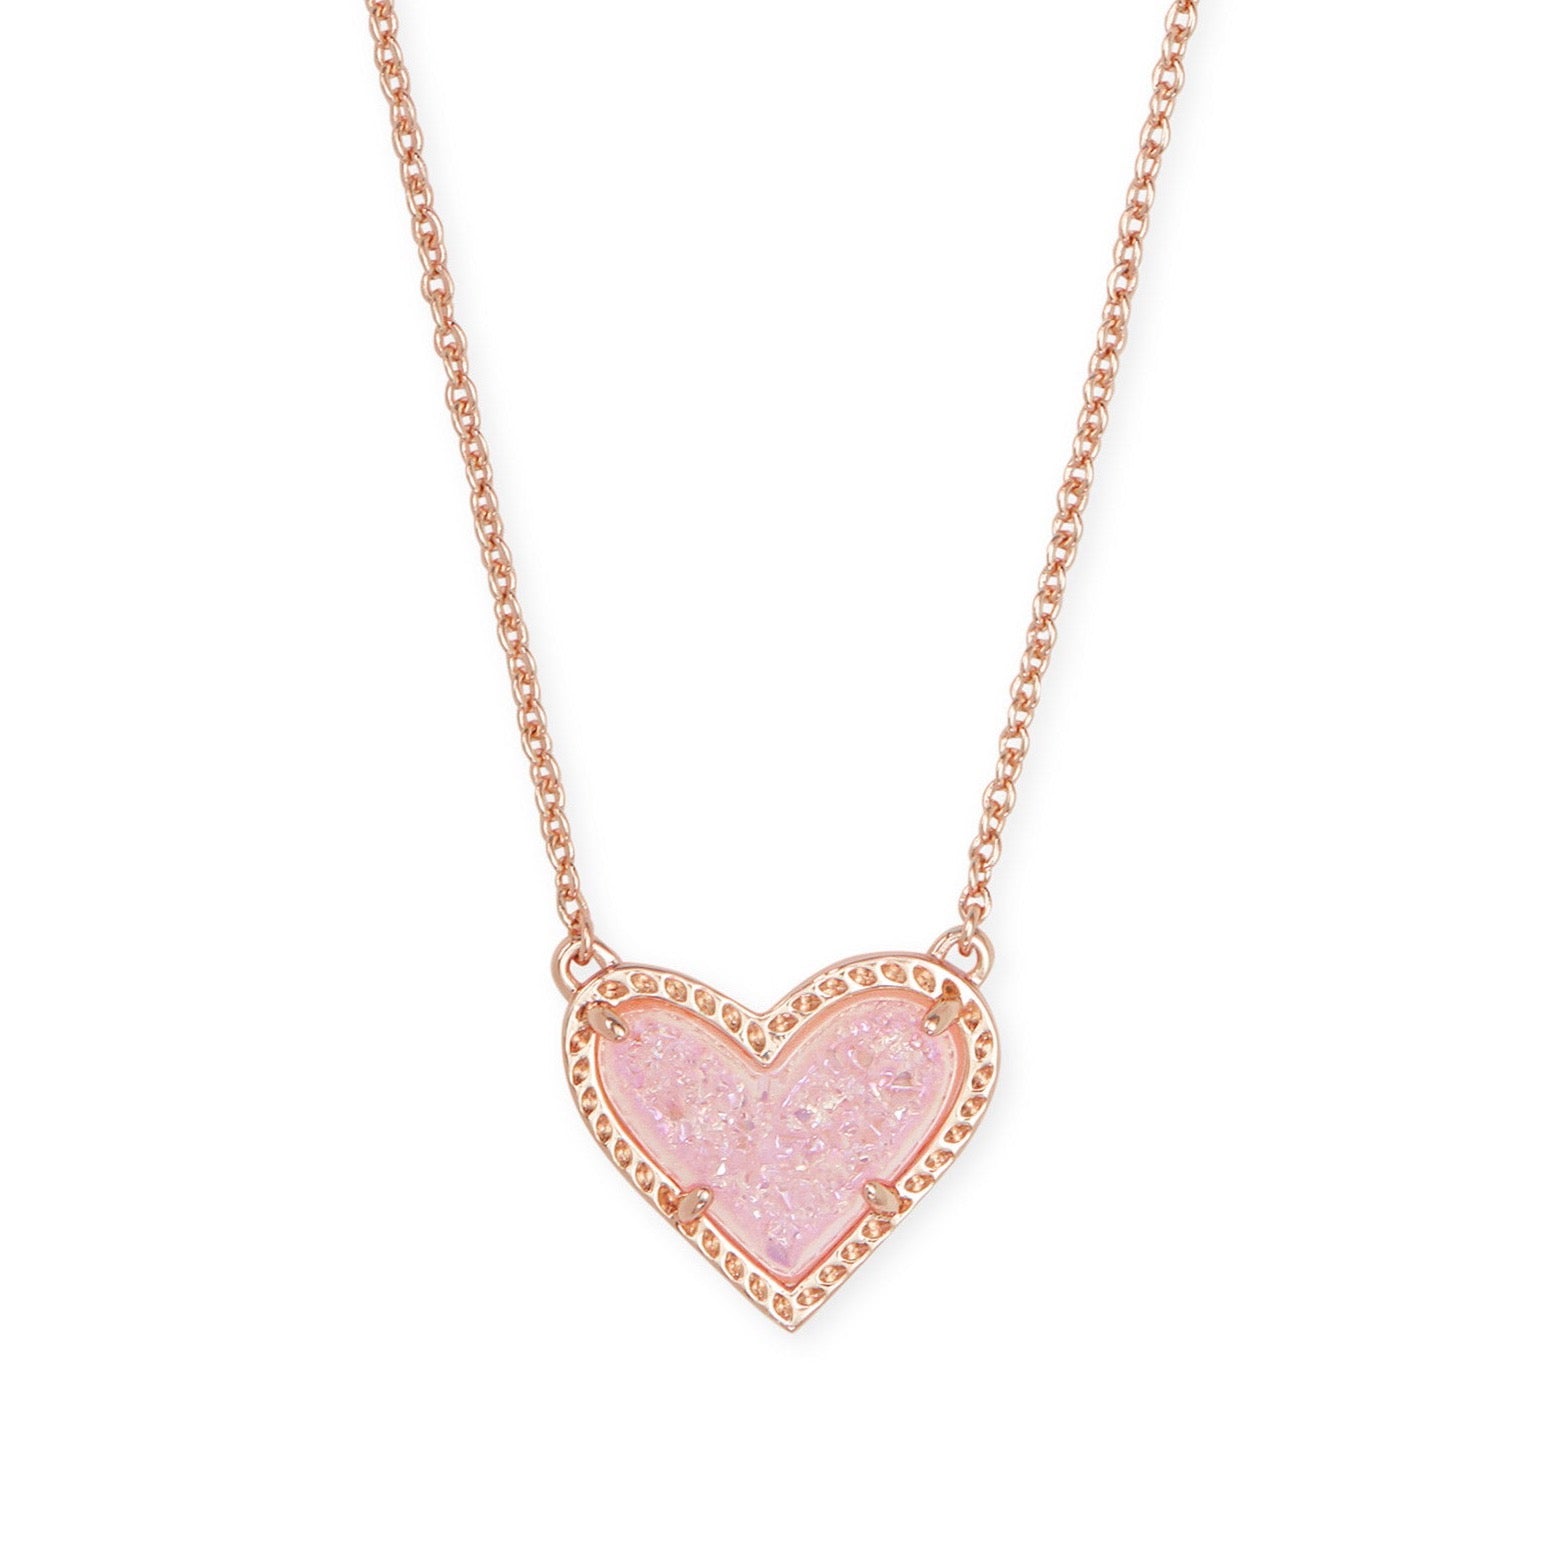 Ari Heart Short Pendant Necklace-Necklaces-Vixen Collection, Day Spa and Women's Boutique Located in Seattle, Washington